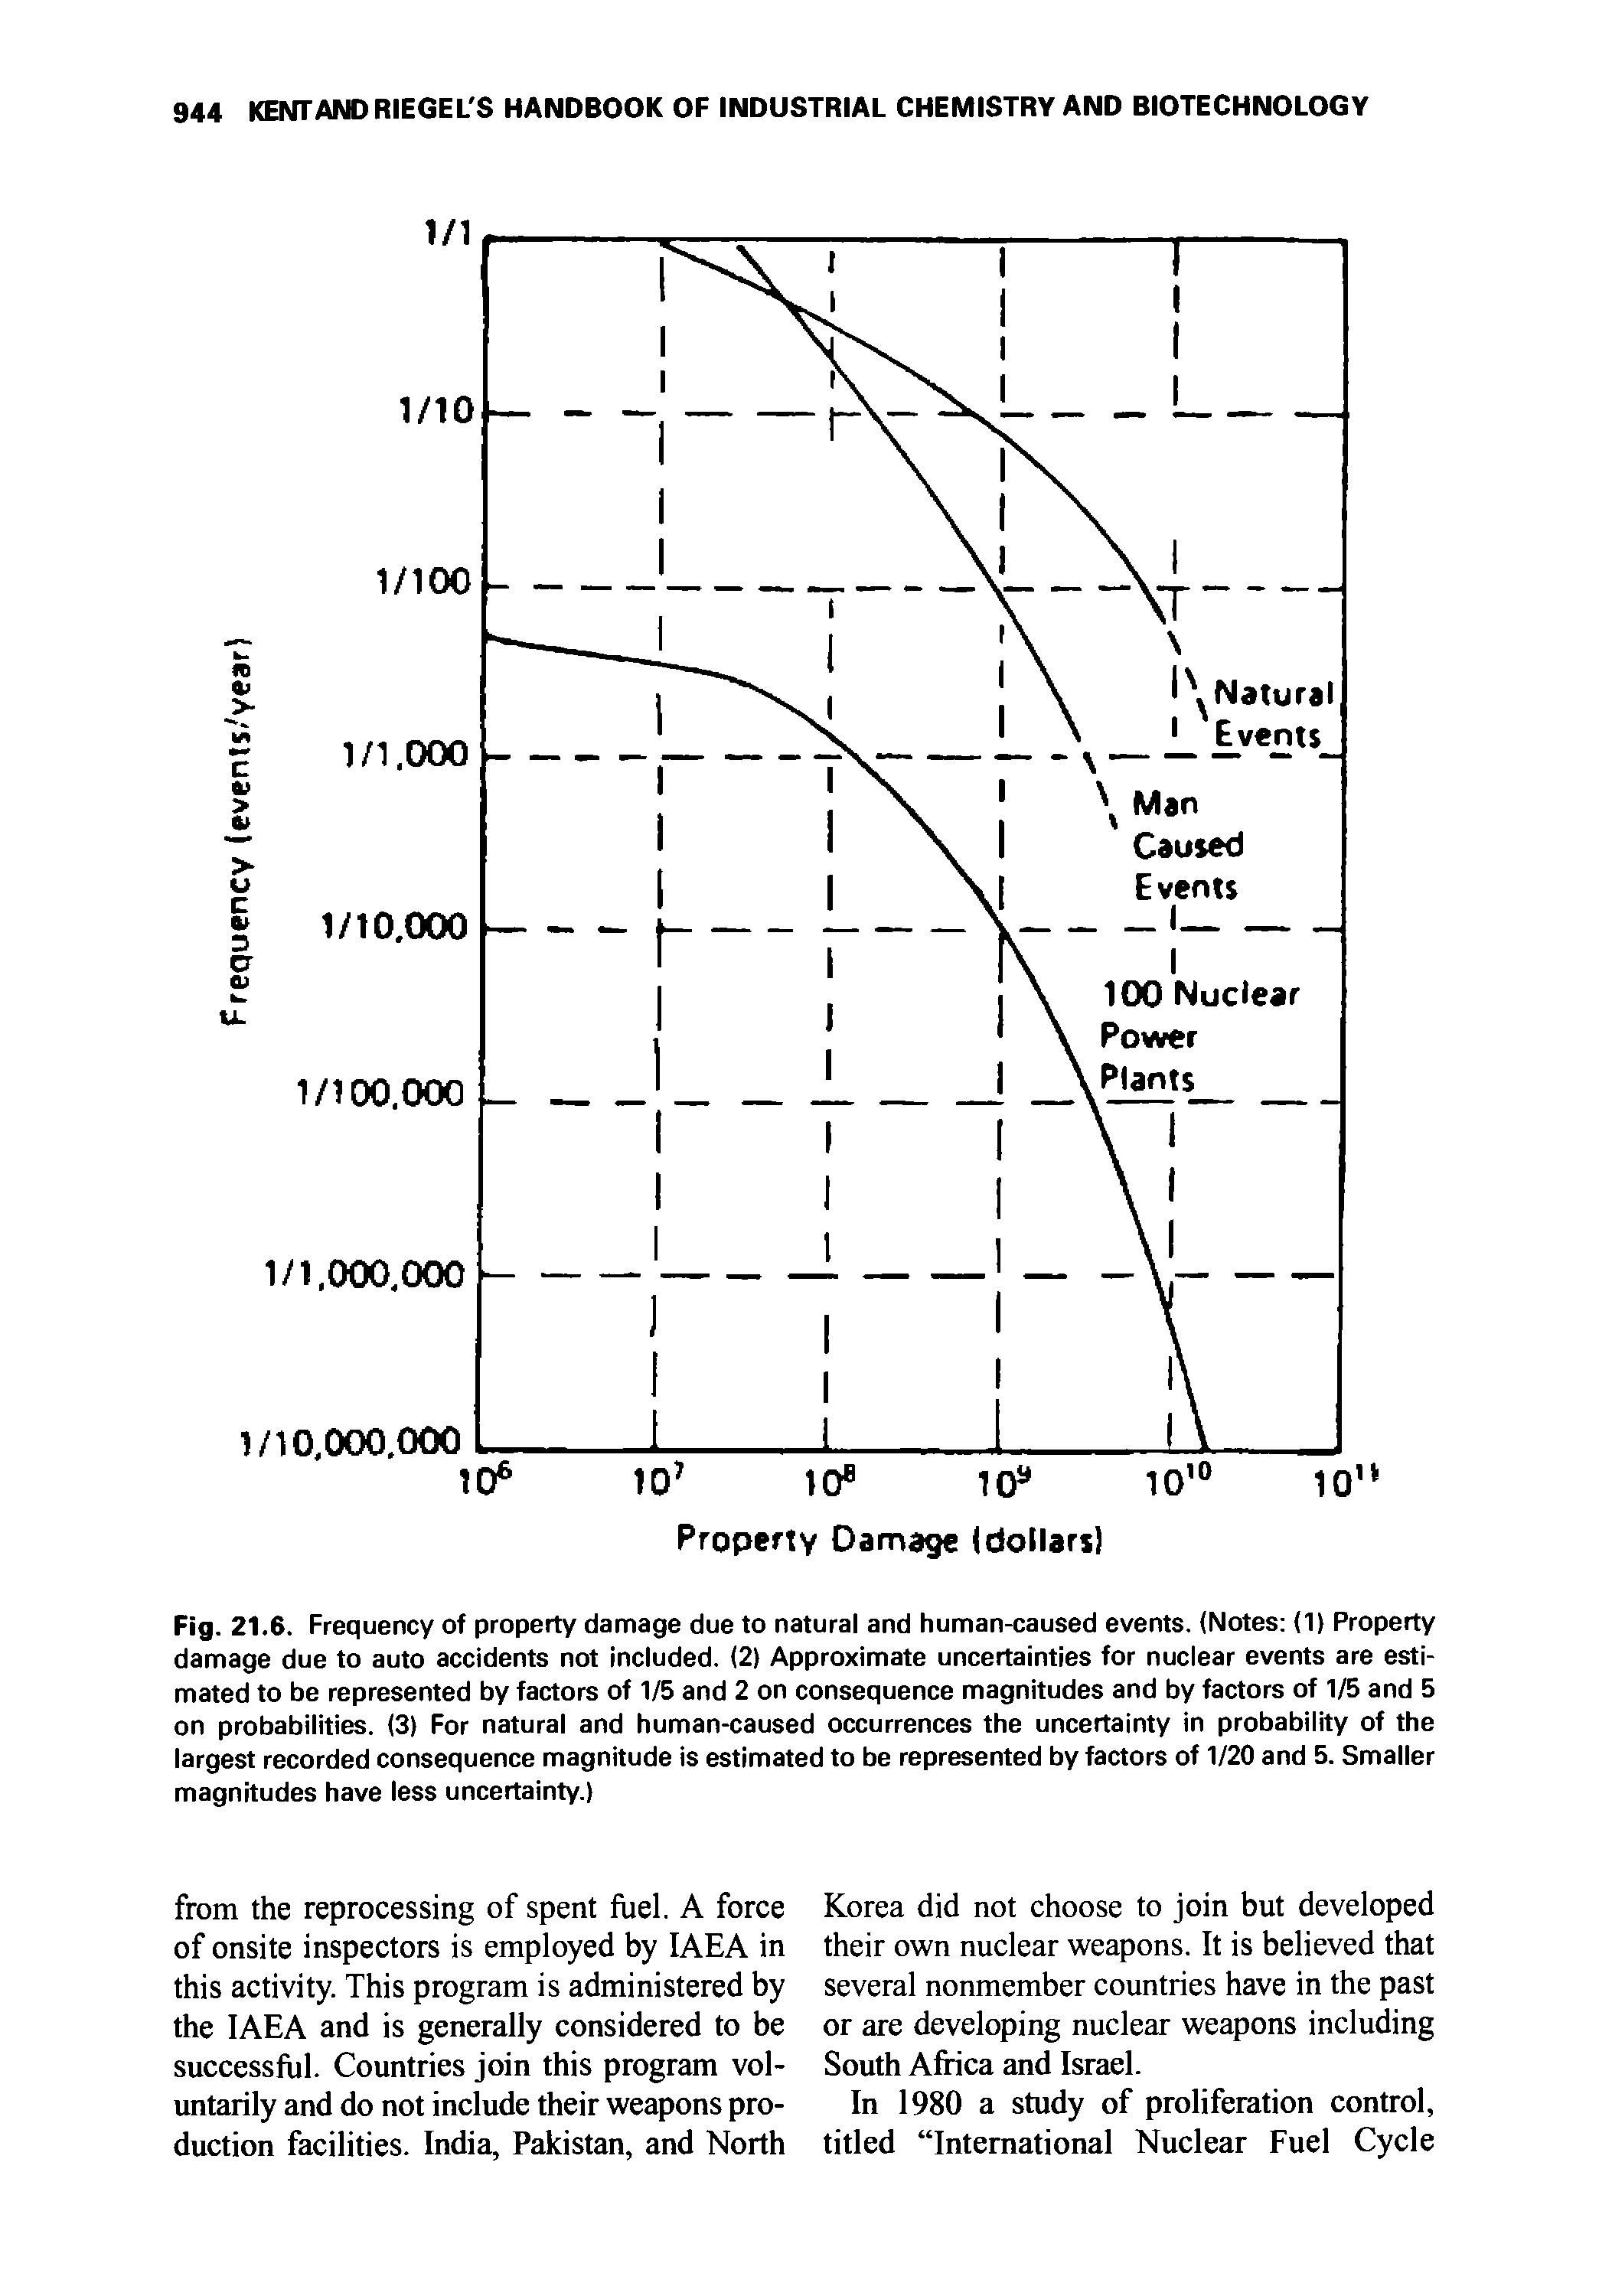 Fig. 21.6. Frequency of property damage due to natural and human-caused events. (Notes (1) Property damage due to auto accidents not included. (2) Approximate uncertainties for nuclear events are estimated to be represented by factors of 1/5 and 2 on consequence magnitudes and by factors of 1/5 and 5 on probabilities. (3) For natural and human-caused occurrences the uncertainty in probability of the largest recorded consequence magnitude is estimated to be represented by factors of 1/20 and 5. Smaller magnitudes have less uncertainty.)...